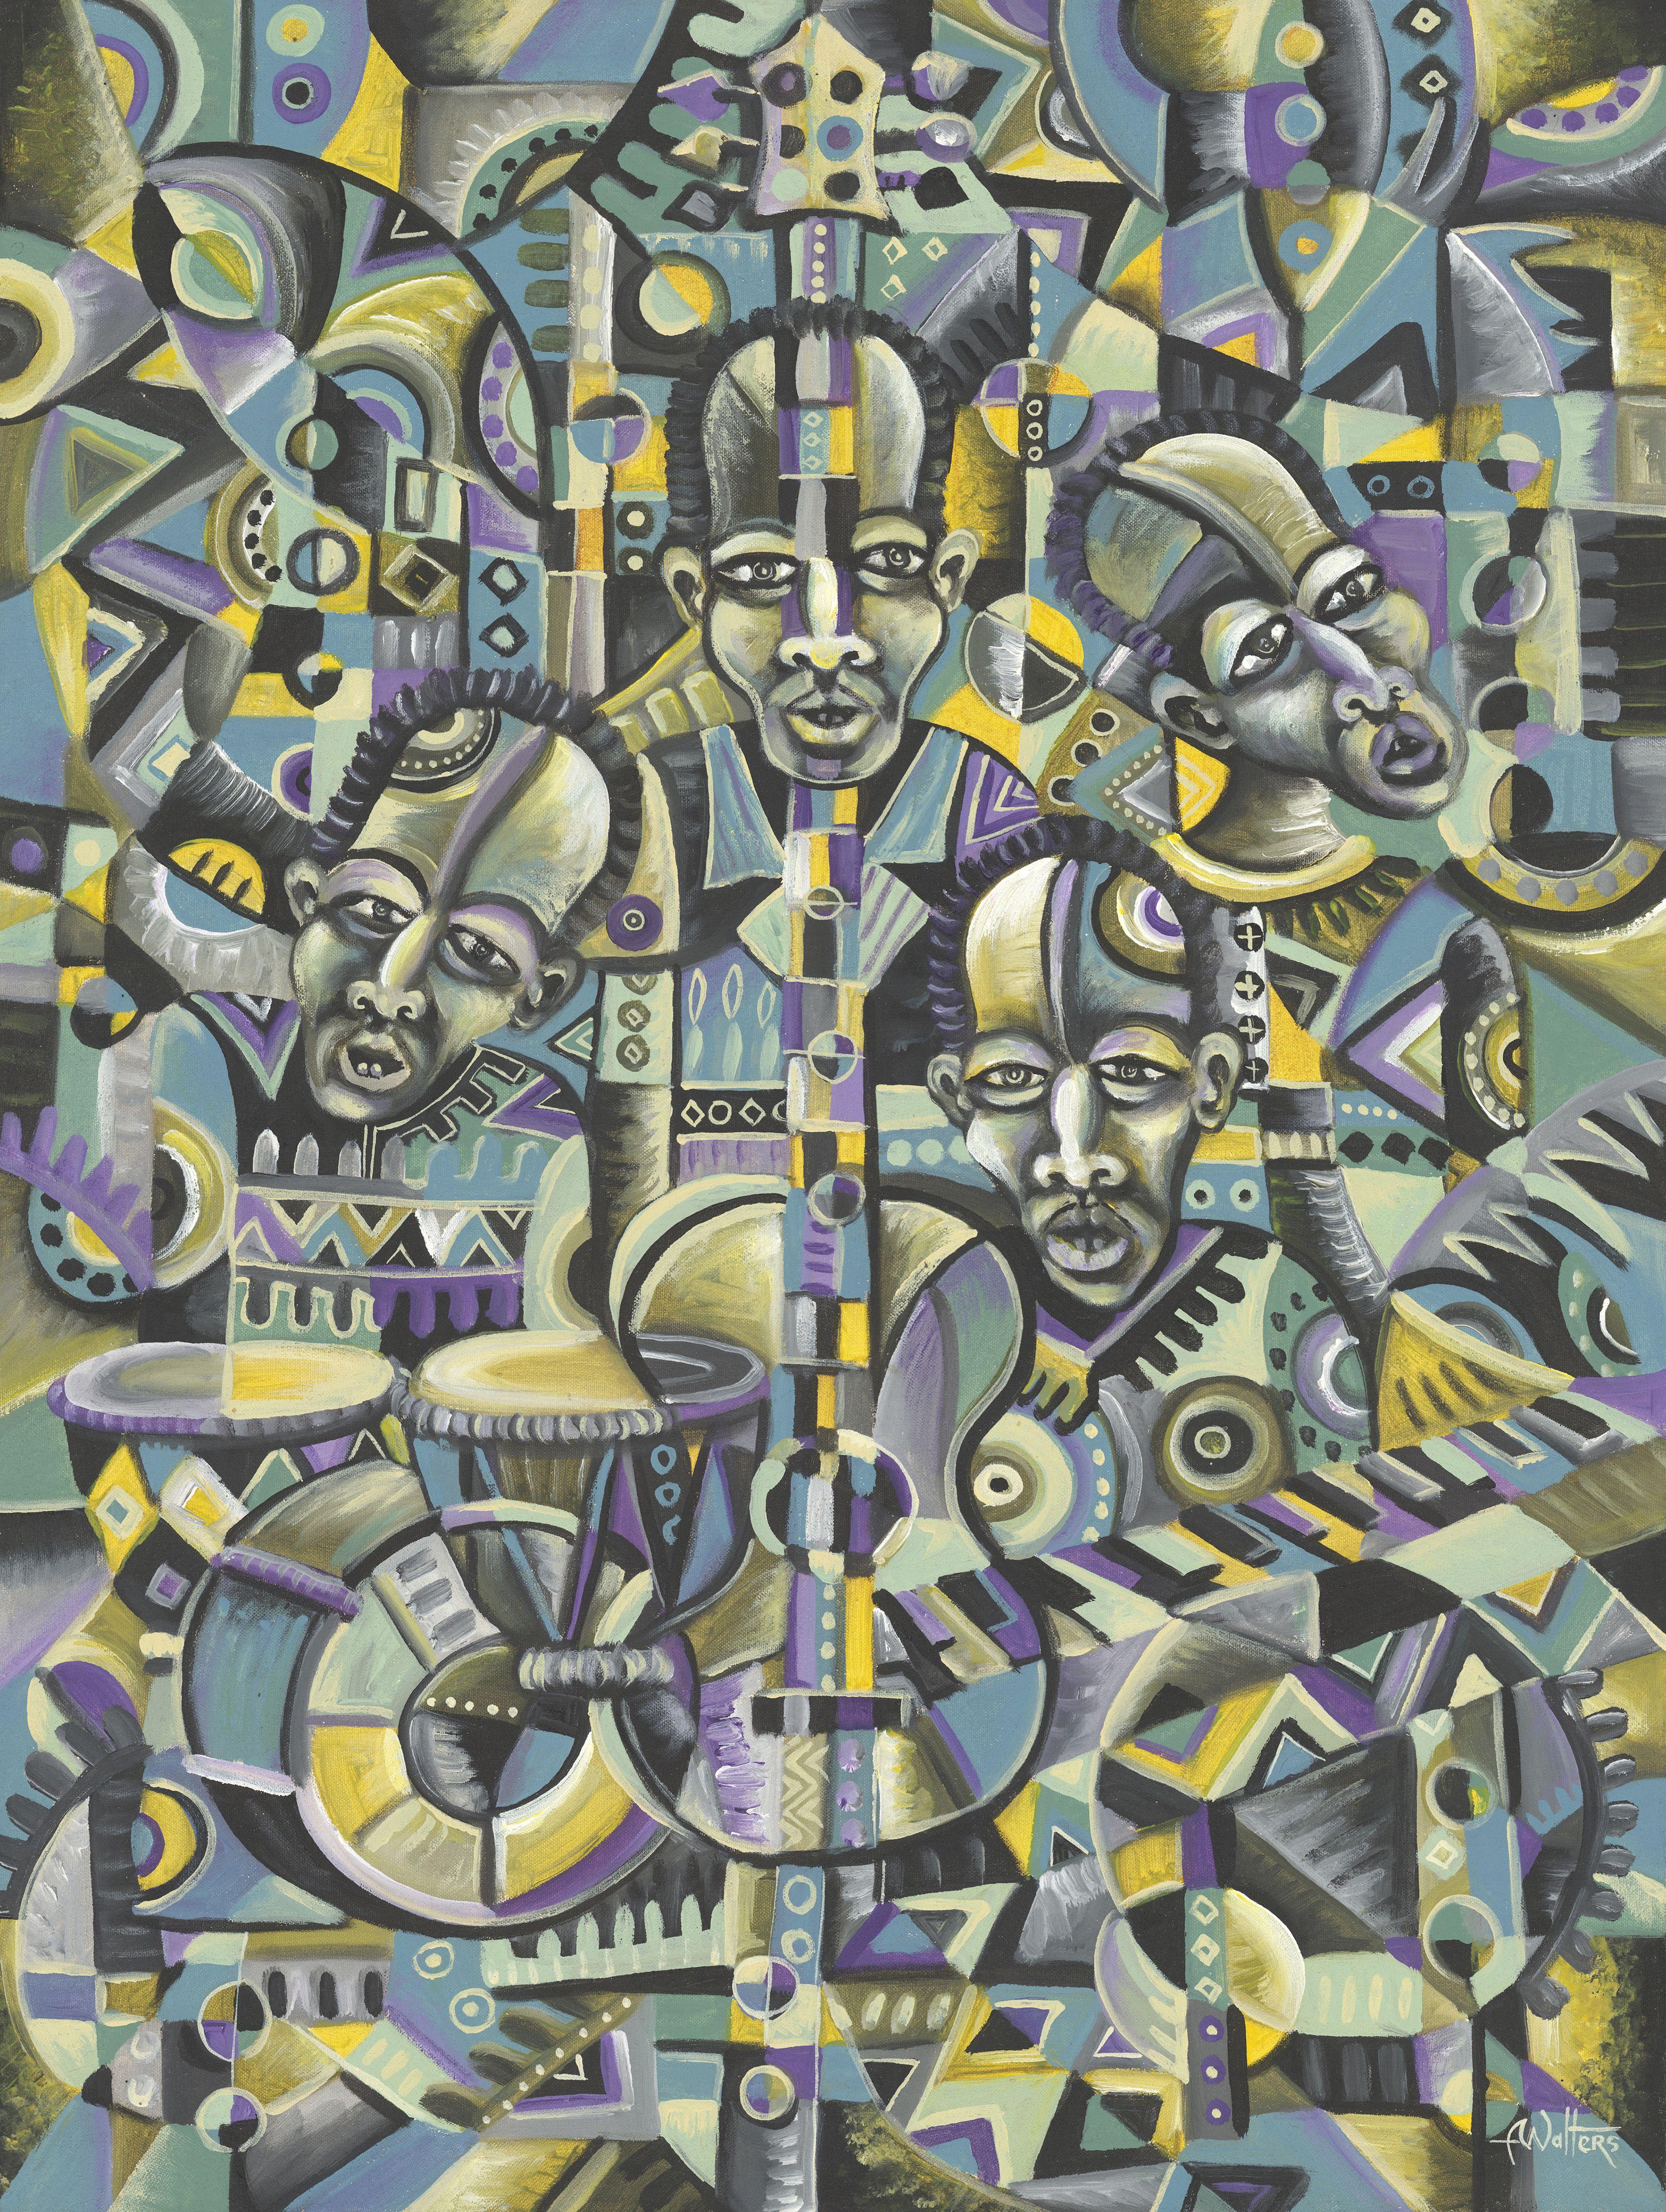 Painting of African blues musicians in muted colors by Cameroon artist Angu Walters who is himself a musician and often paints about music.  :: Painting :: Surrealism :: This piece comes with an official certificate of authenticity signed by the